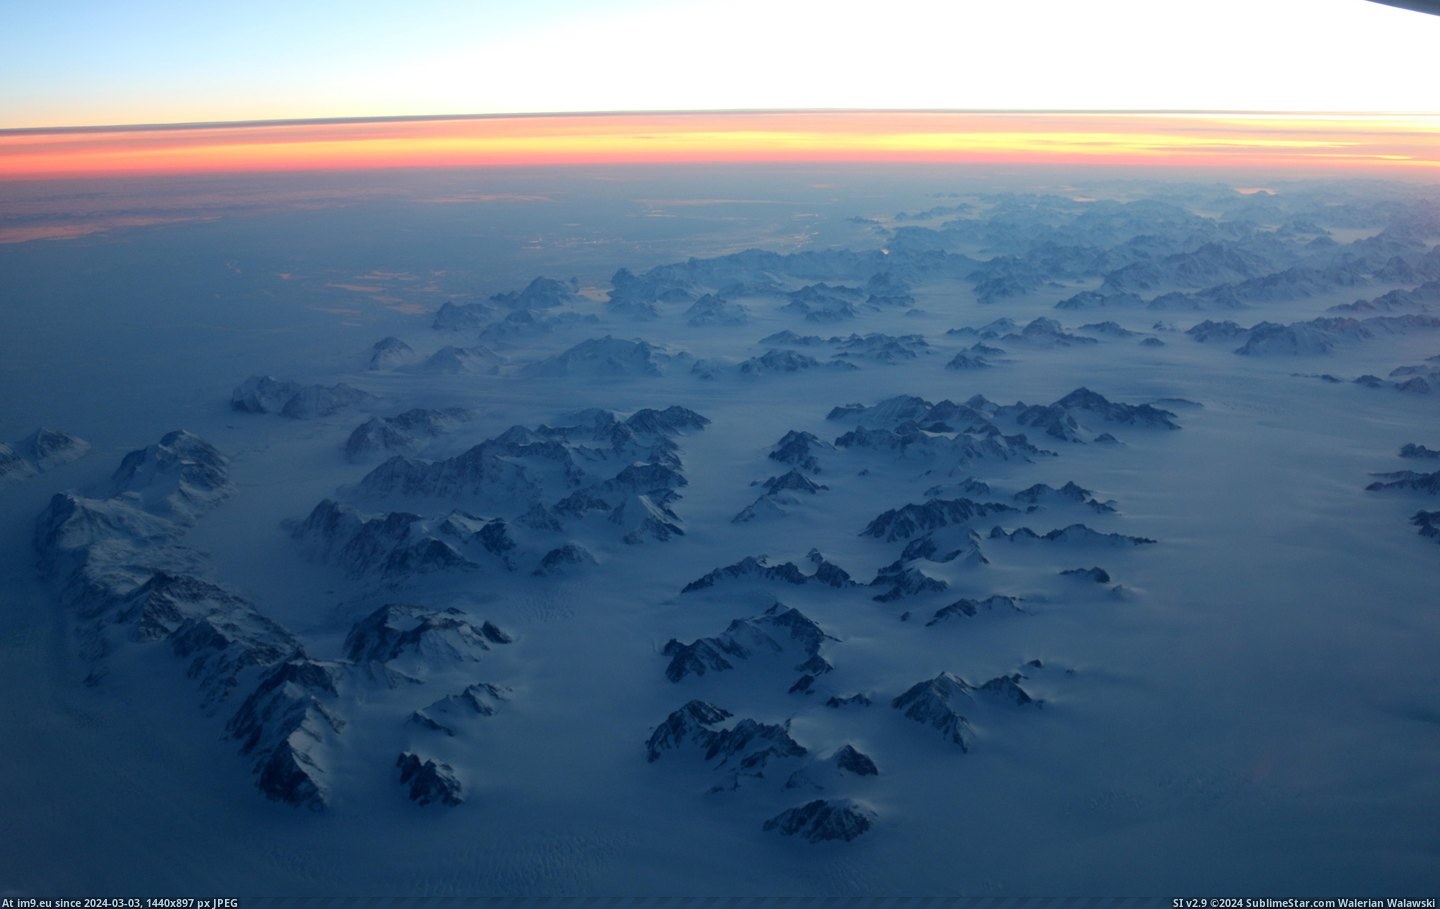 #Sunset #Canada #Ocean #Flight #Meets #Greenland #Iceland #Lucky #Frozen [Earthporn] Where Greenland meets the frozen ocean at sunset. Lucky view on a flight between Iceland and Canada  [5472x3419] Pic. (Image of album My r/EARTHPORN favs))